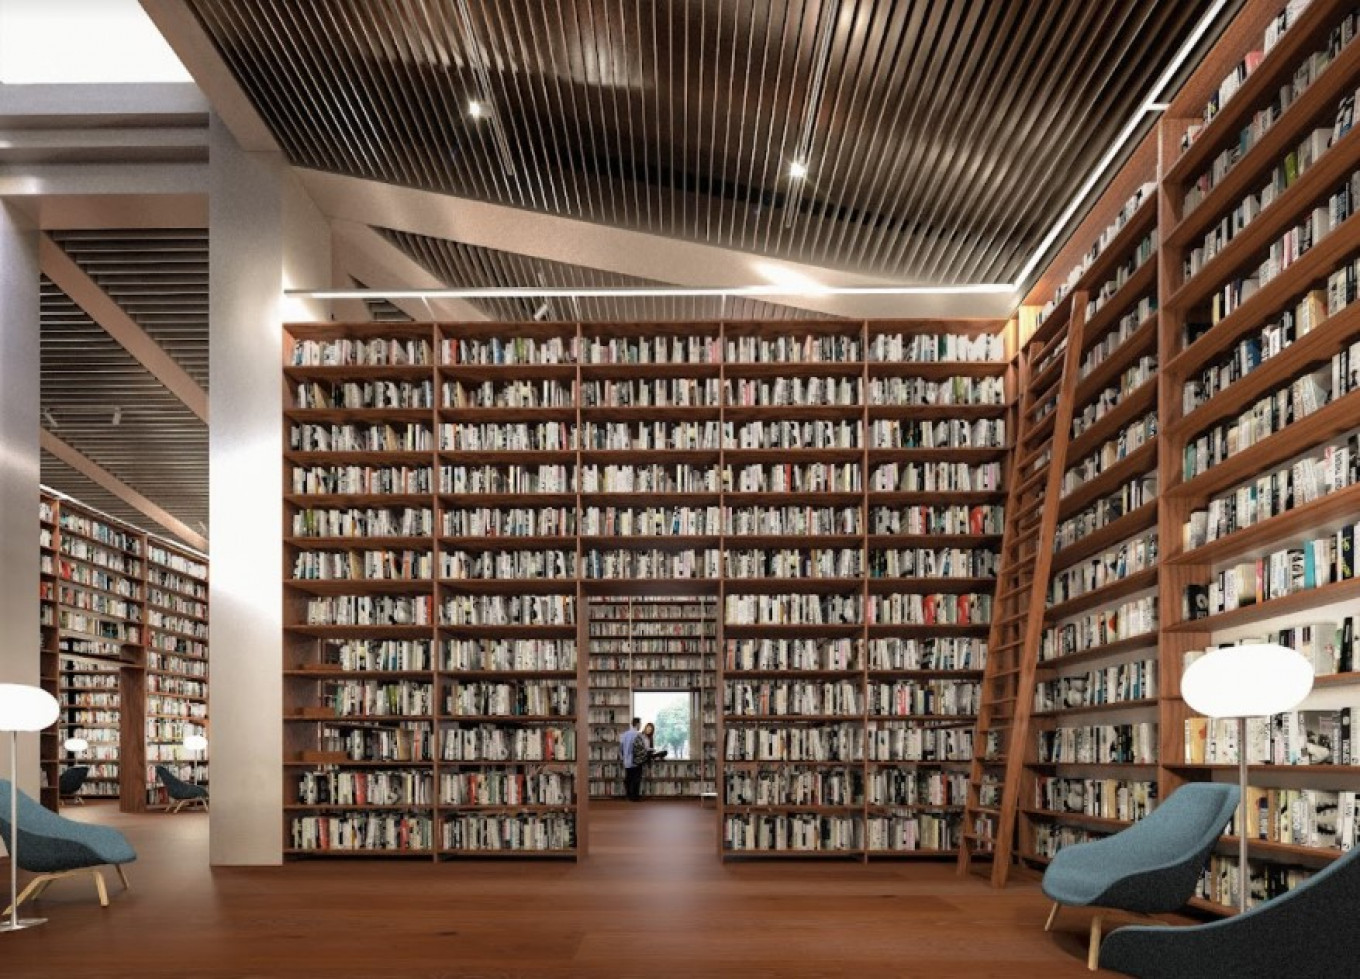 Rendering of the proposed library Courtesy of the Garage Museum of Contemporary Art